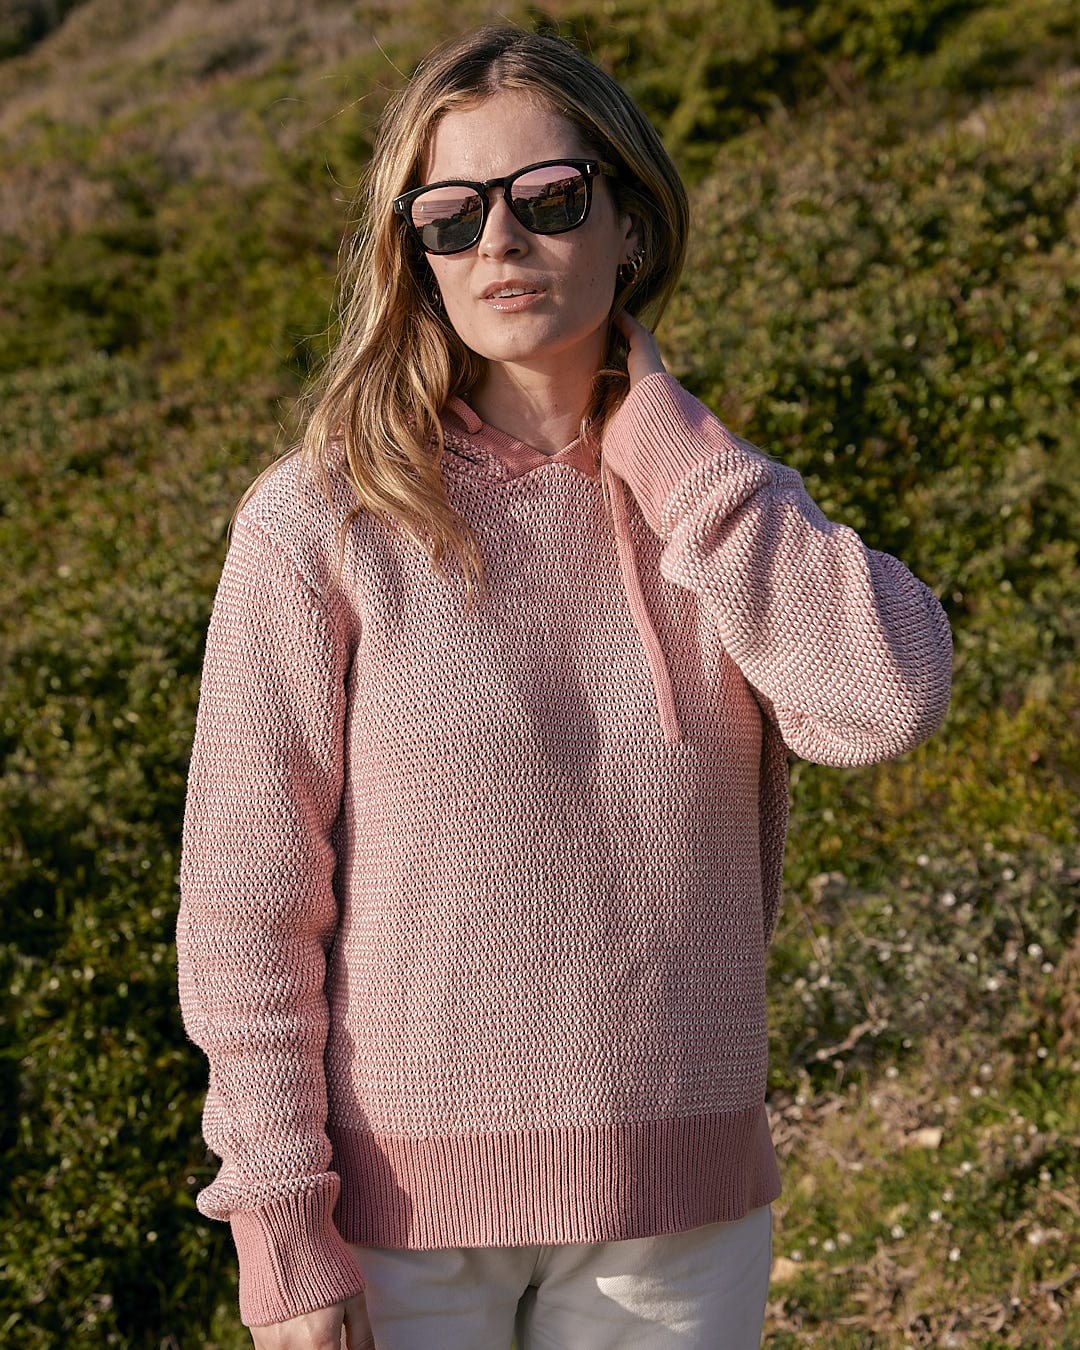 A woman wearing a Saltrock Poppy - Womens Knitted Pop Hoodie - Mid Pink sweater and sunglasses.